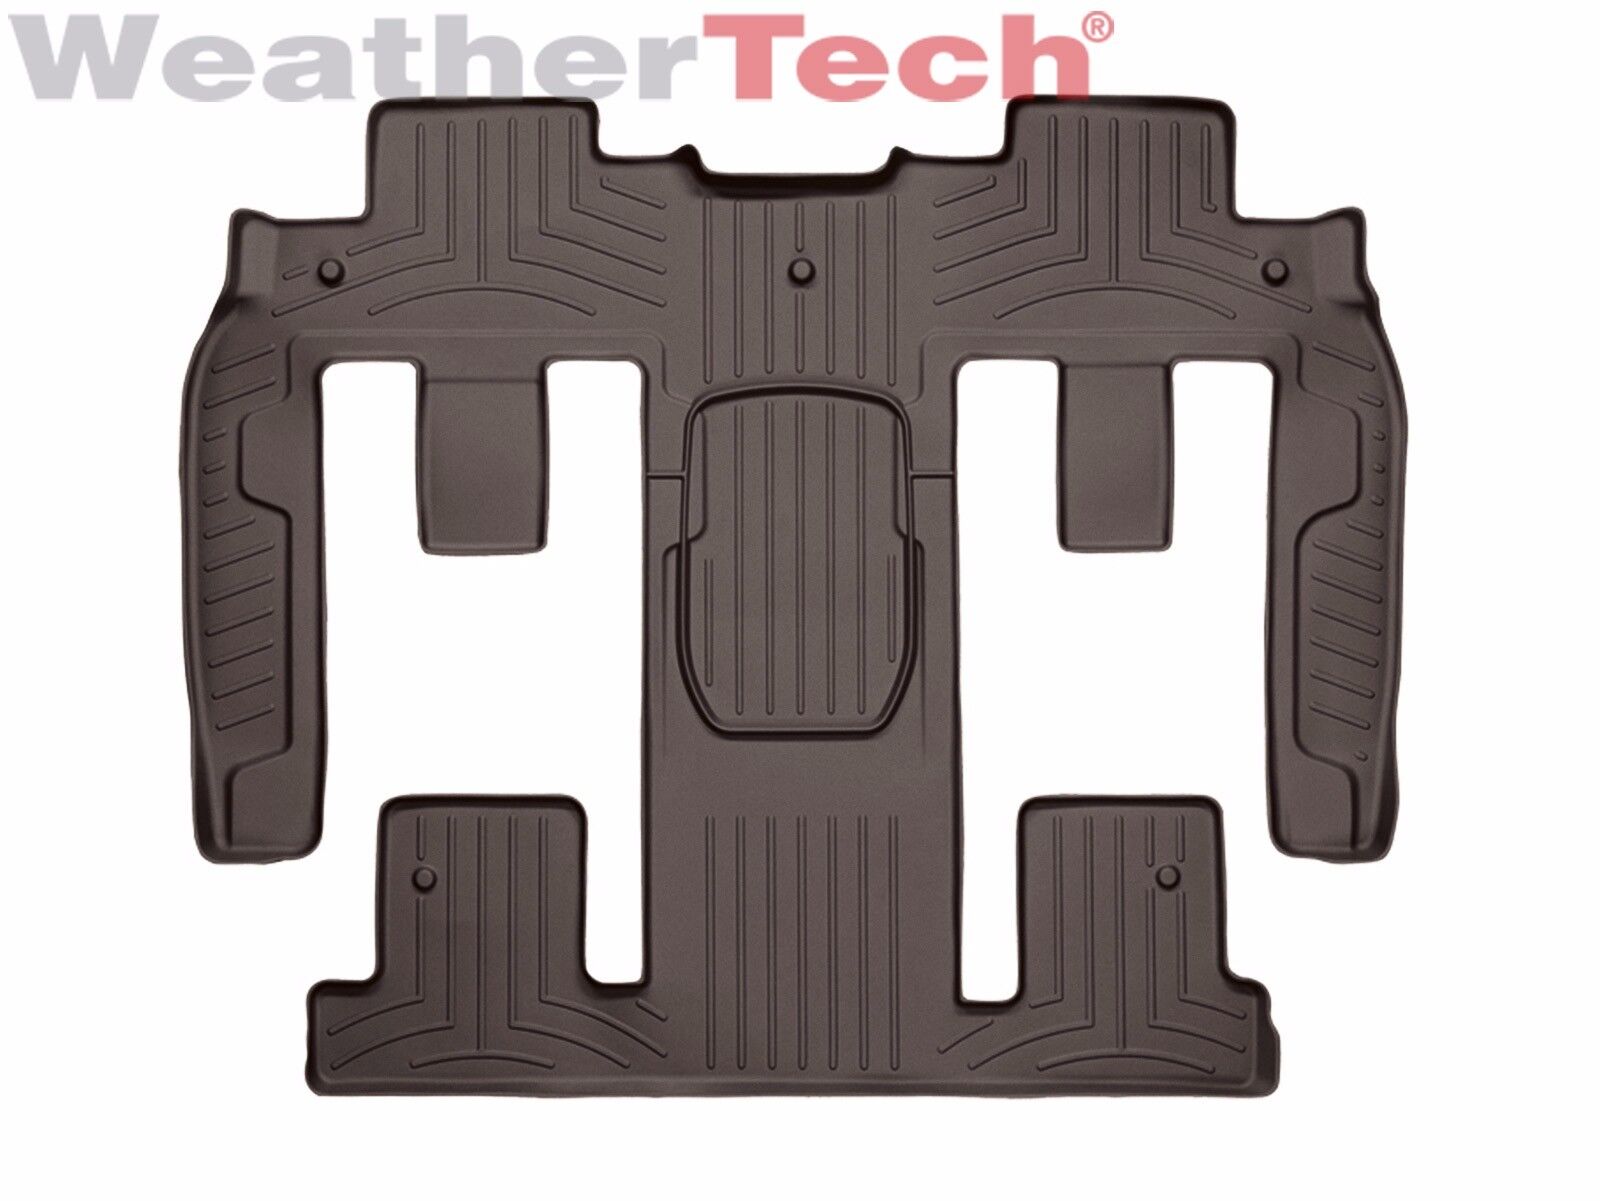 WeatherTech FloorLiner for Enclave/Traverse/Acadia/Outlook- 2nd/3rd Row - Cocoa